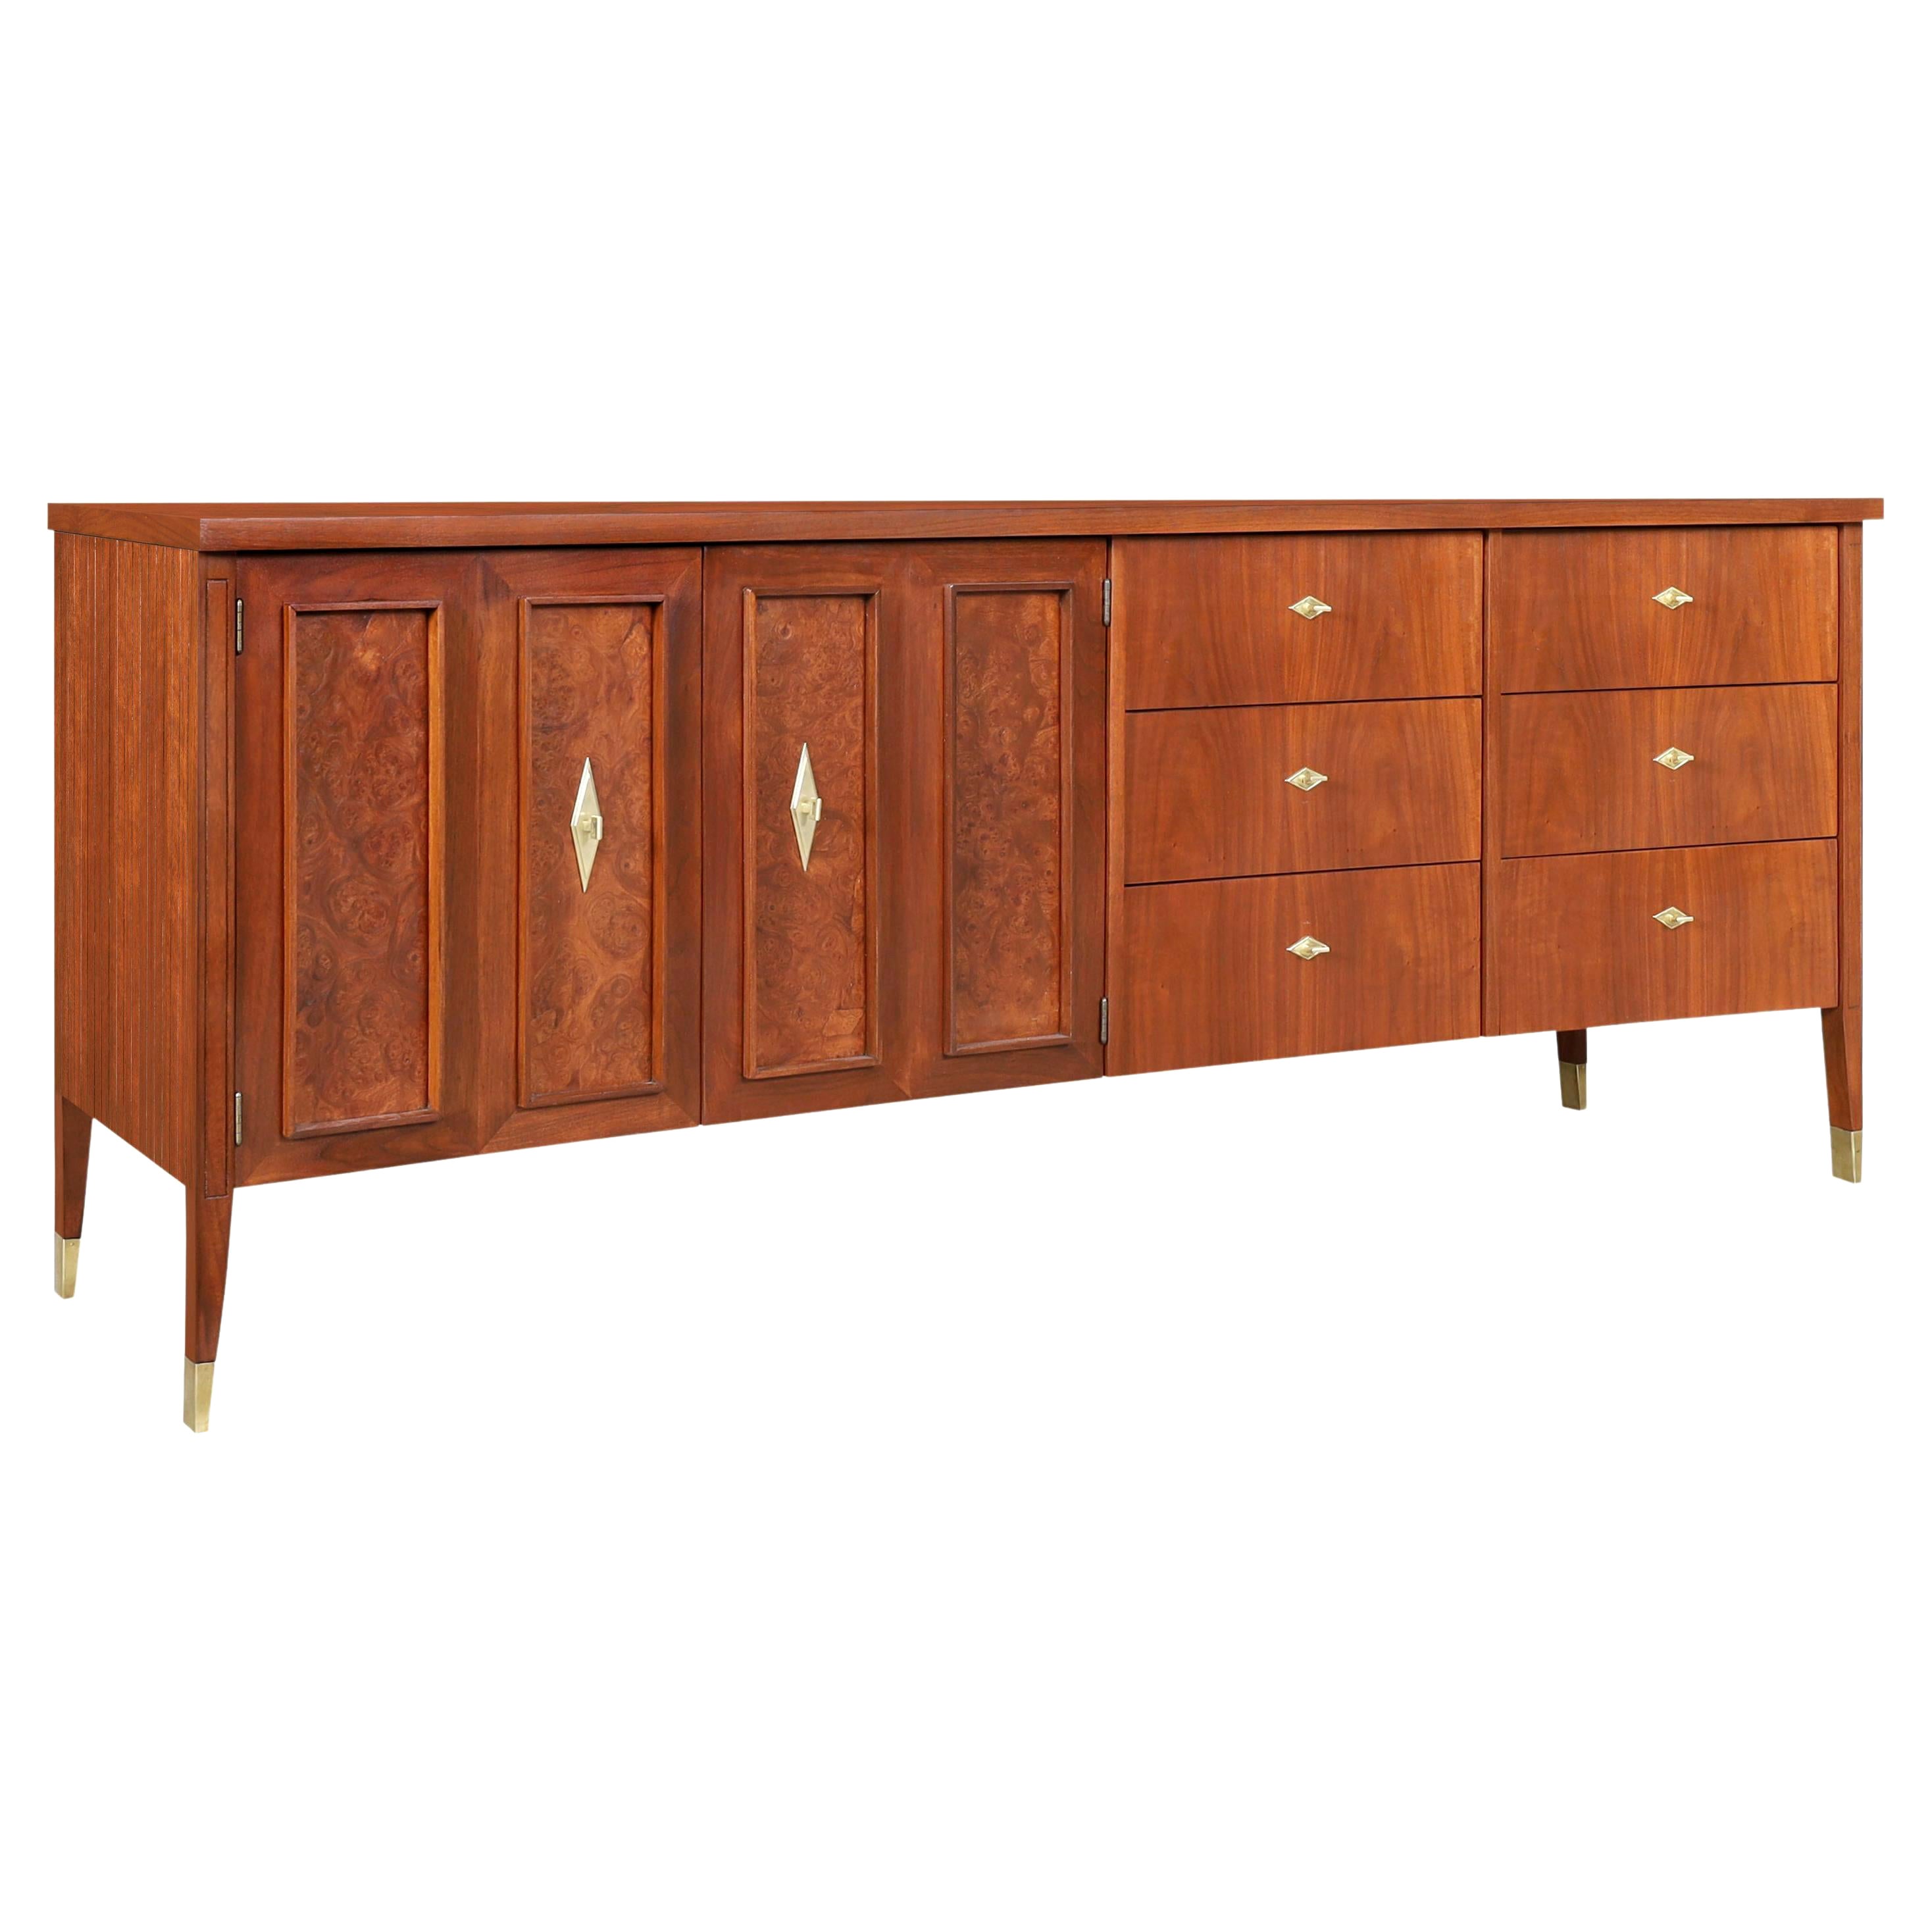 Elm Burl Sideboard by Paul Michel, 1980s for sale at Pamono